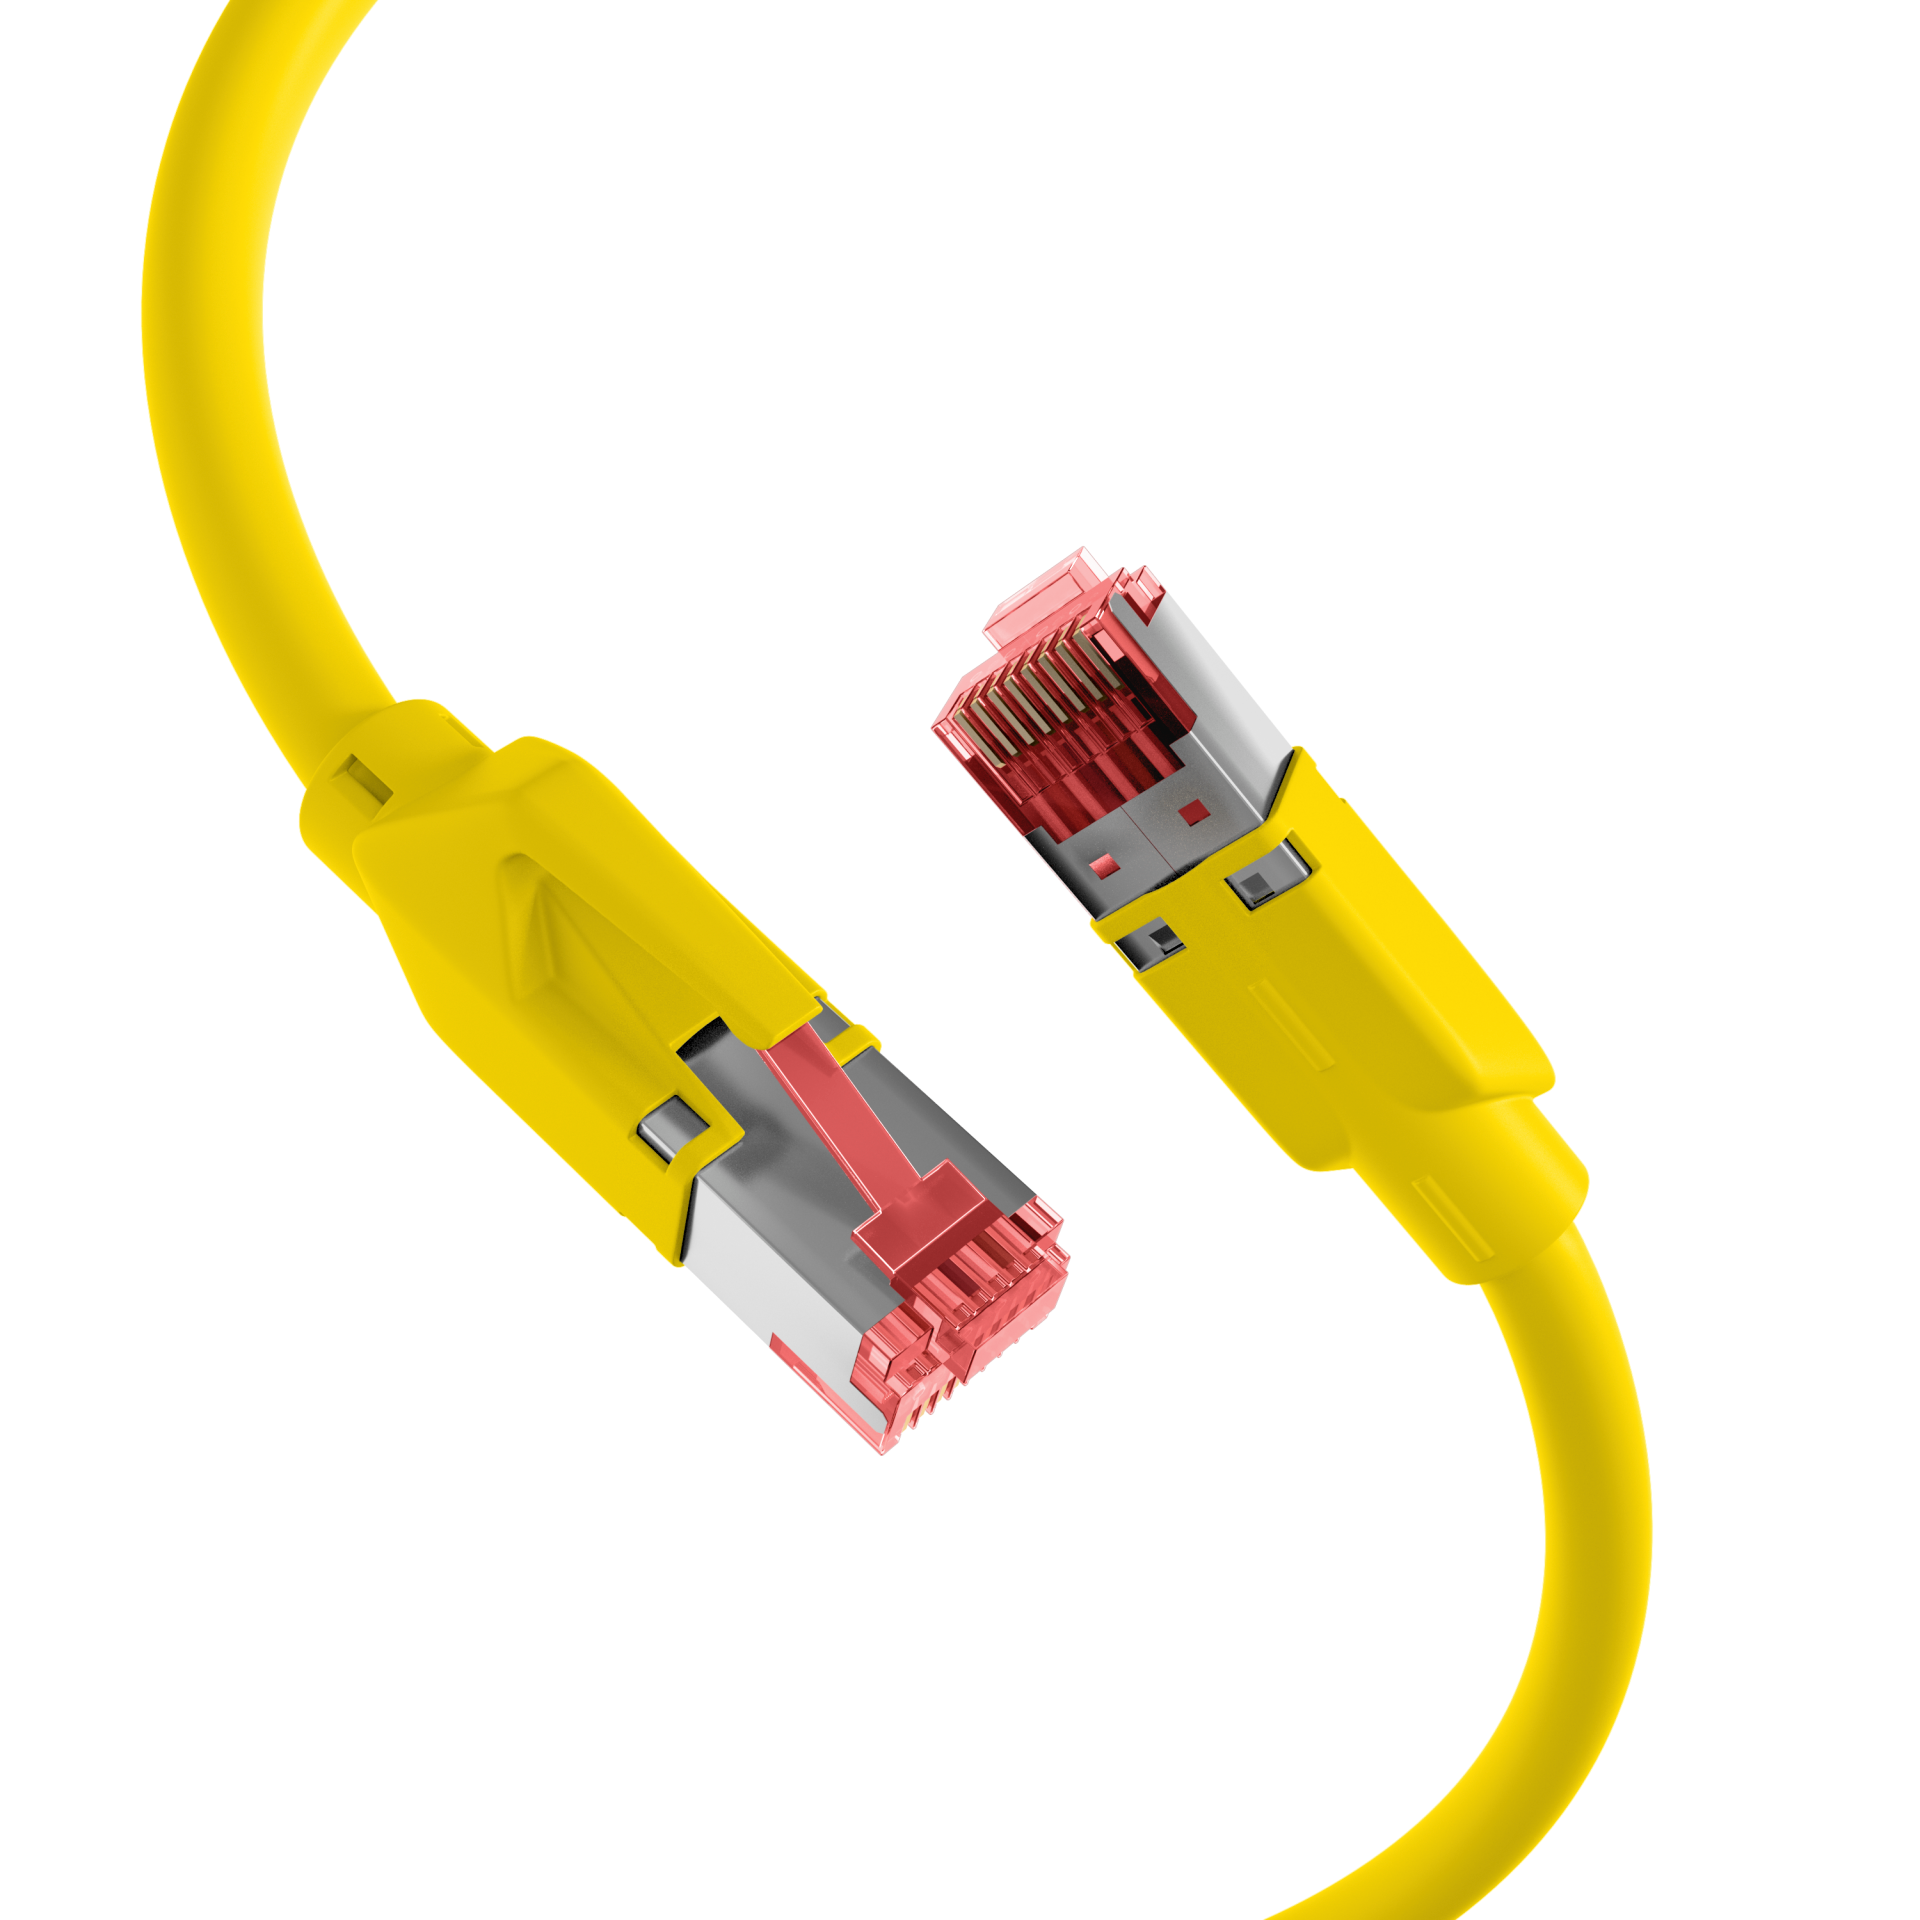 RJ45 Patch Cord Cat.5e SF/UTP PURTM21 for drag chains yellow 7,5m